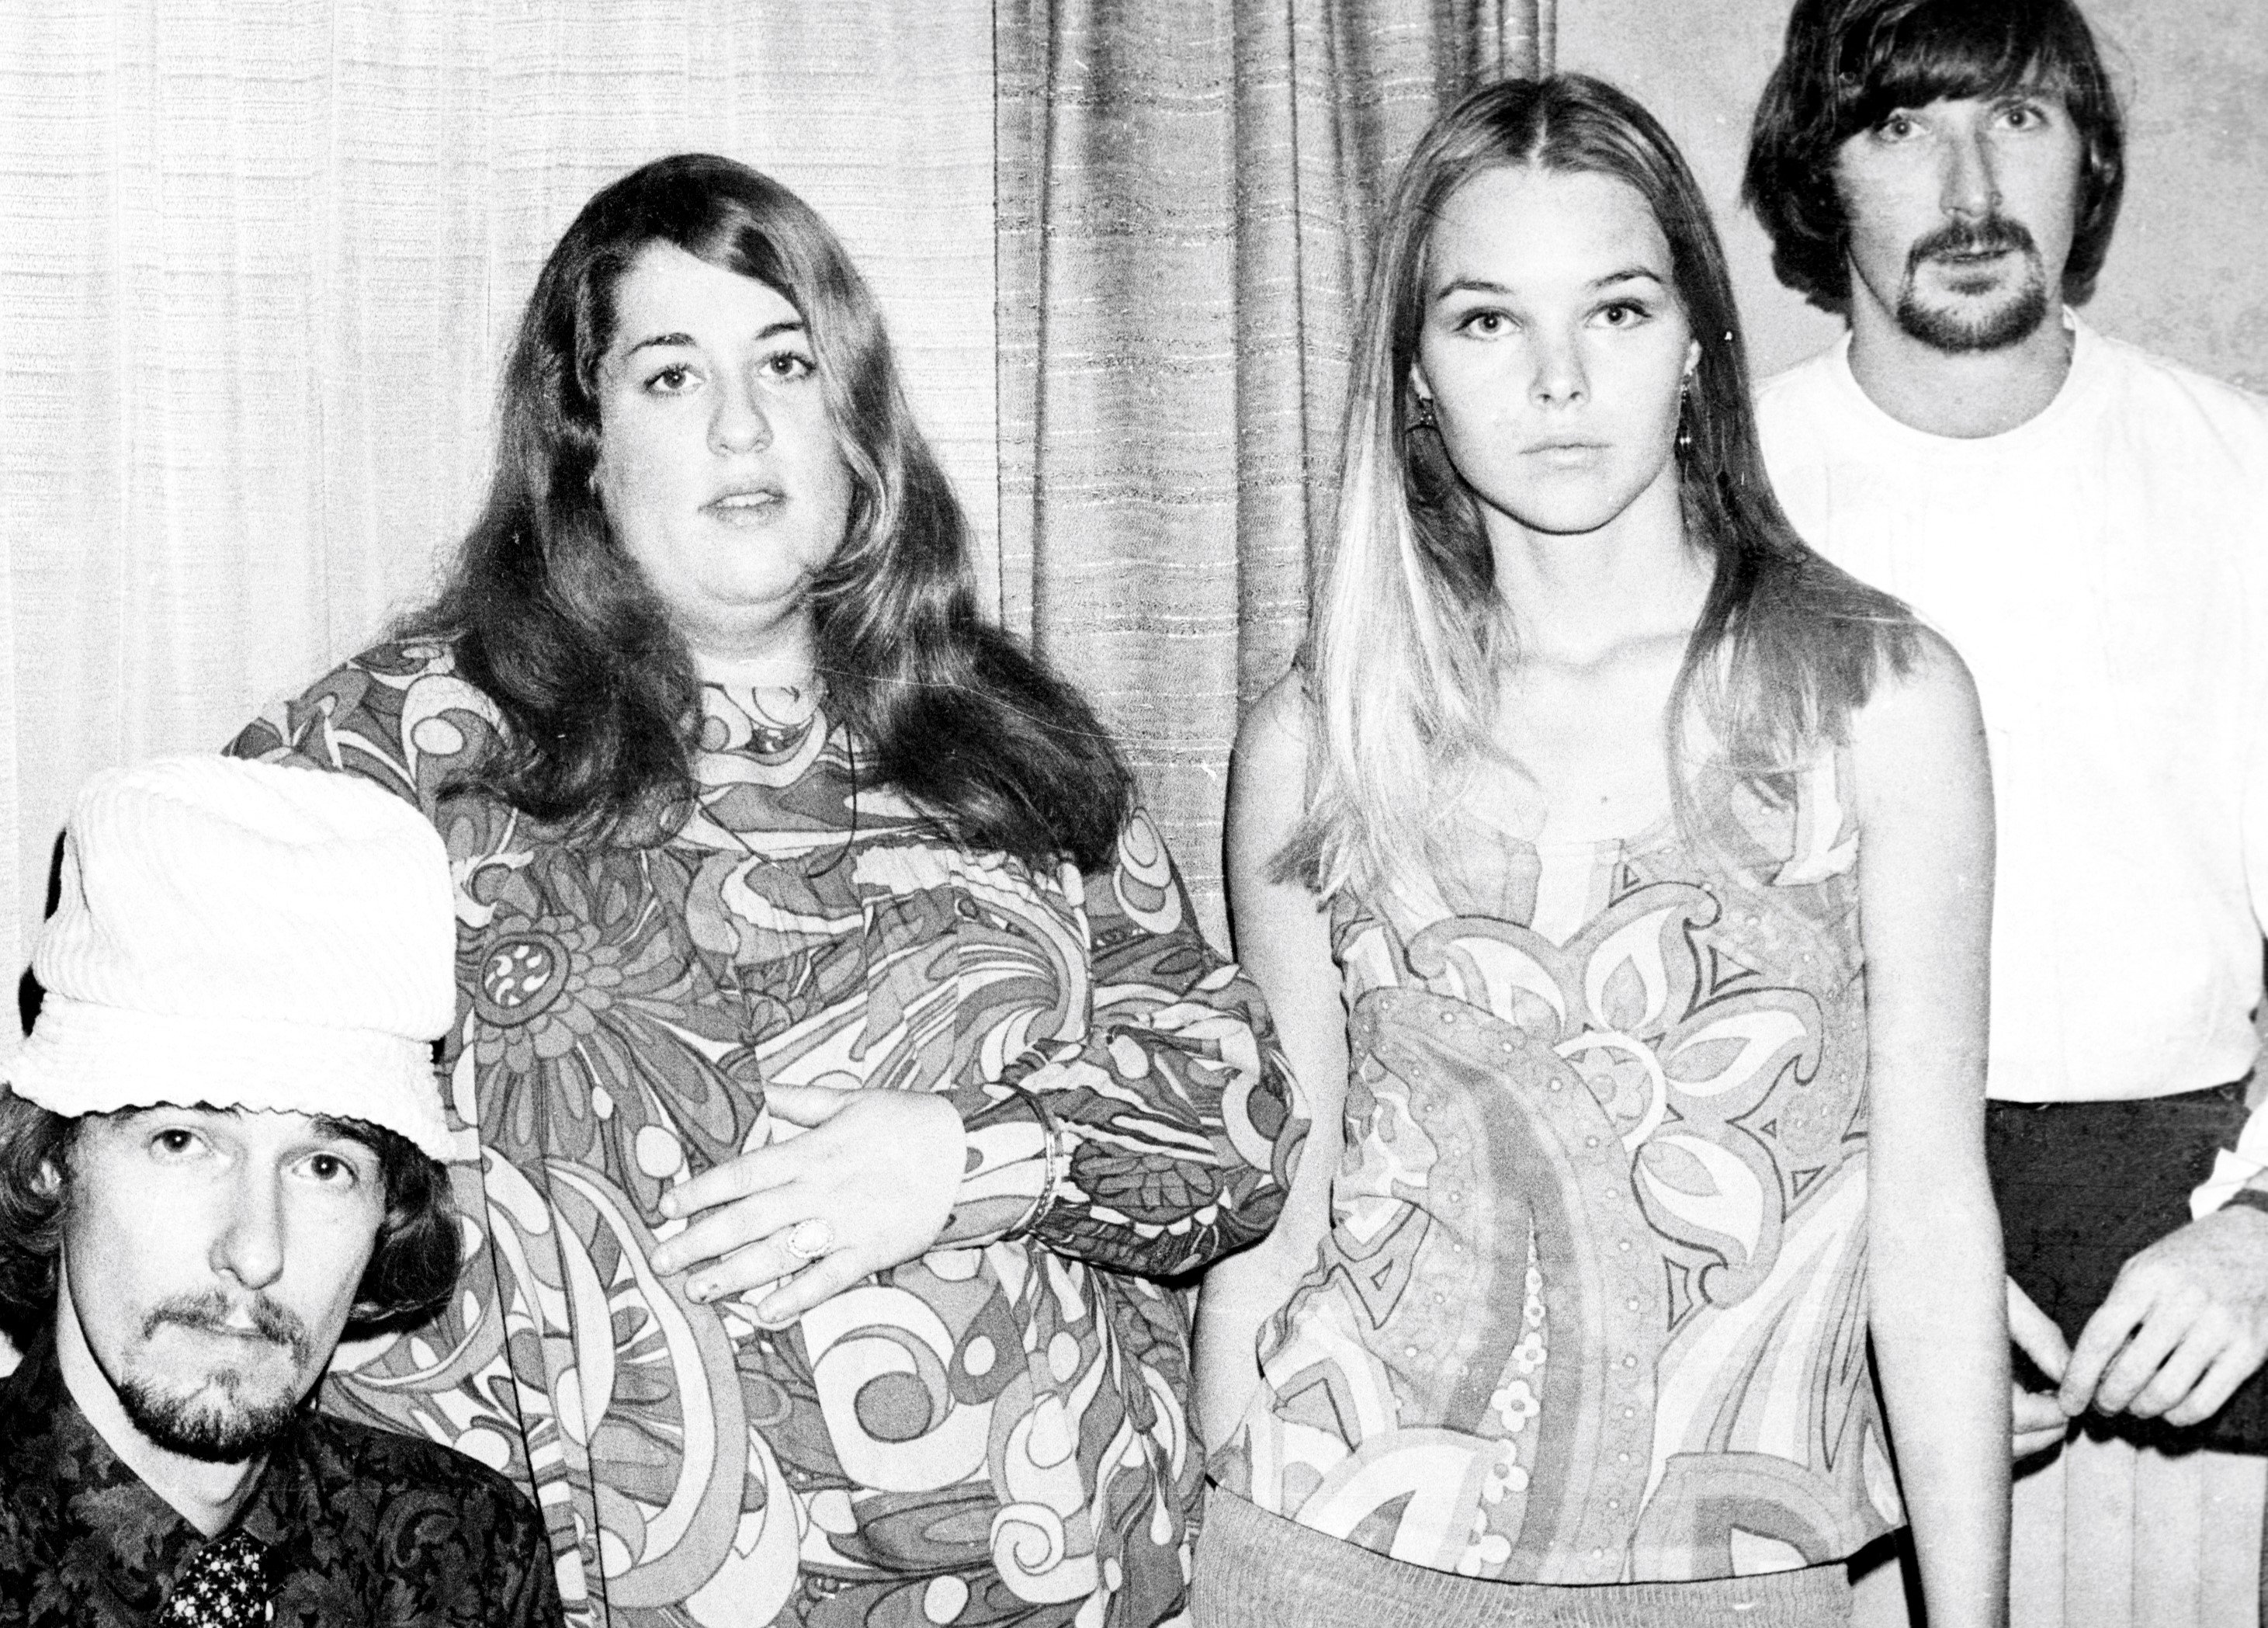 The Mamas & the Papas in black-and-white